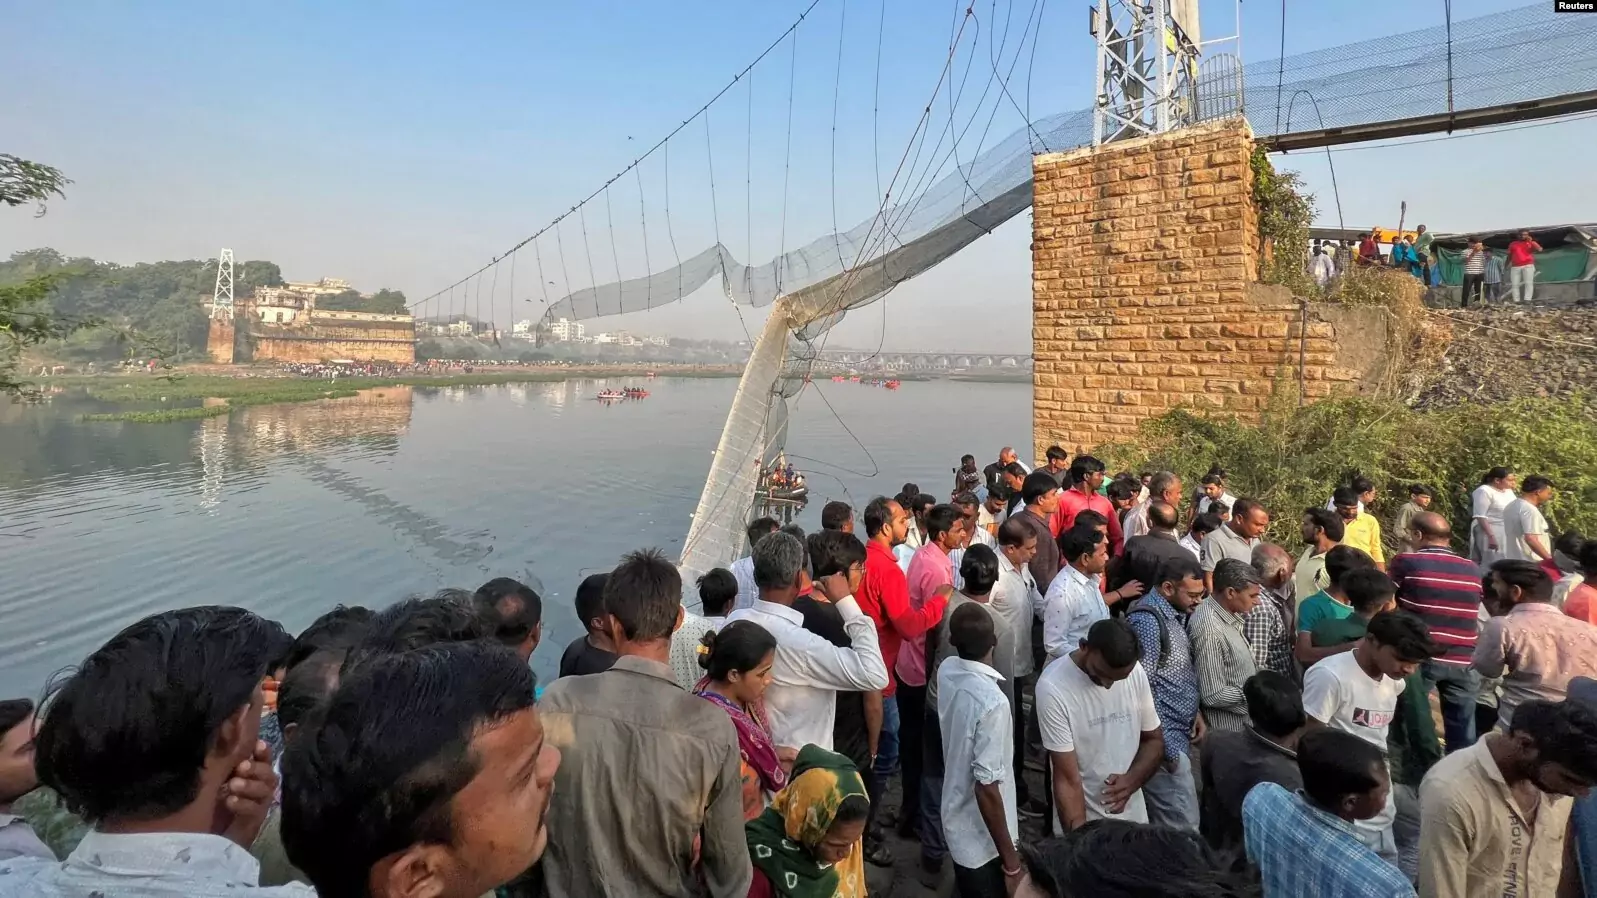 People gather as rescuers search for survivors after a suspension bridge collapsed in Morbi town in the western state of Gujarat, India, Oct. 31, 202